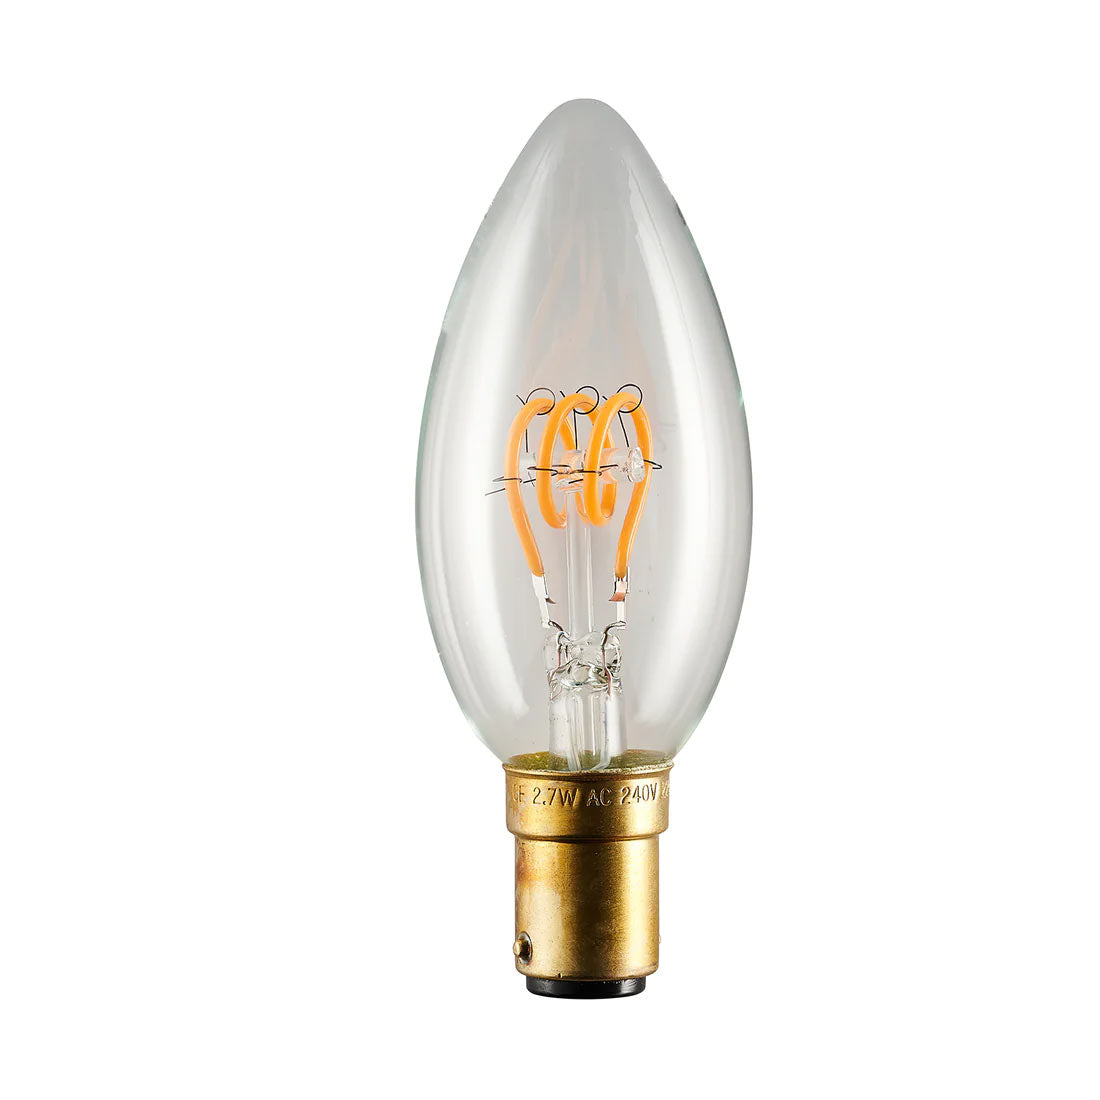 THe Leda Decorative LED Candle Bulb has a B15 fitting and is sold by South Charlotte Fine Lighting